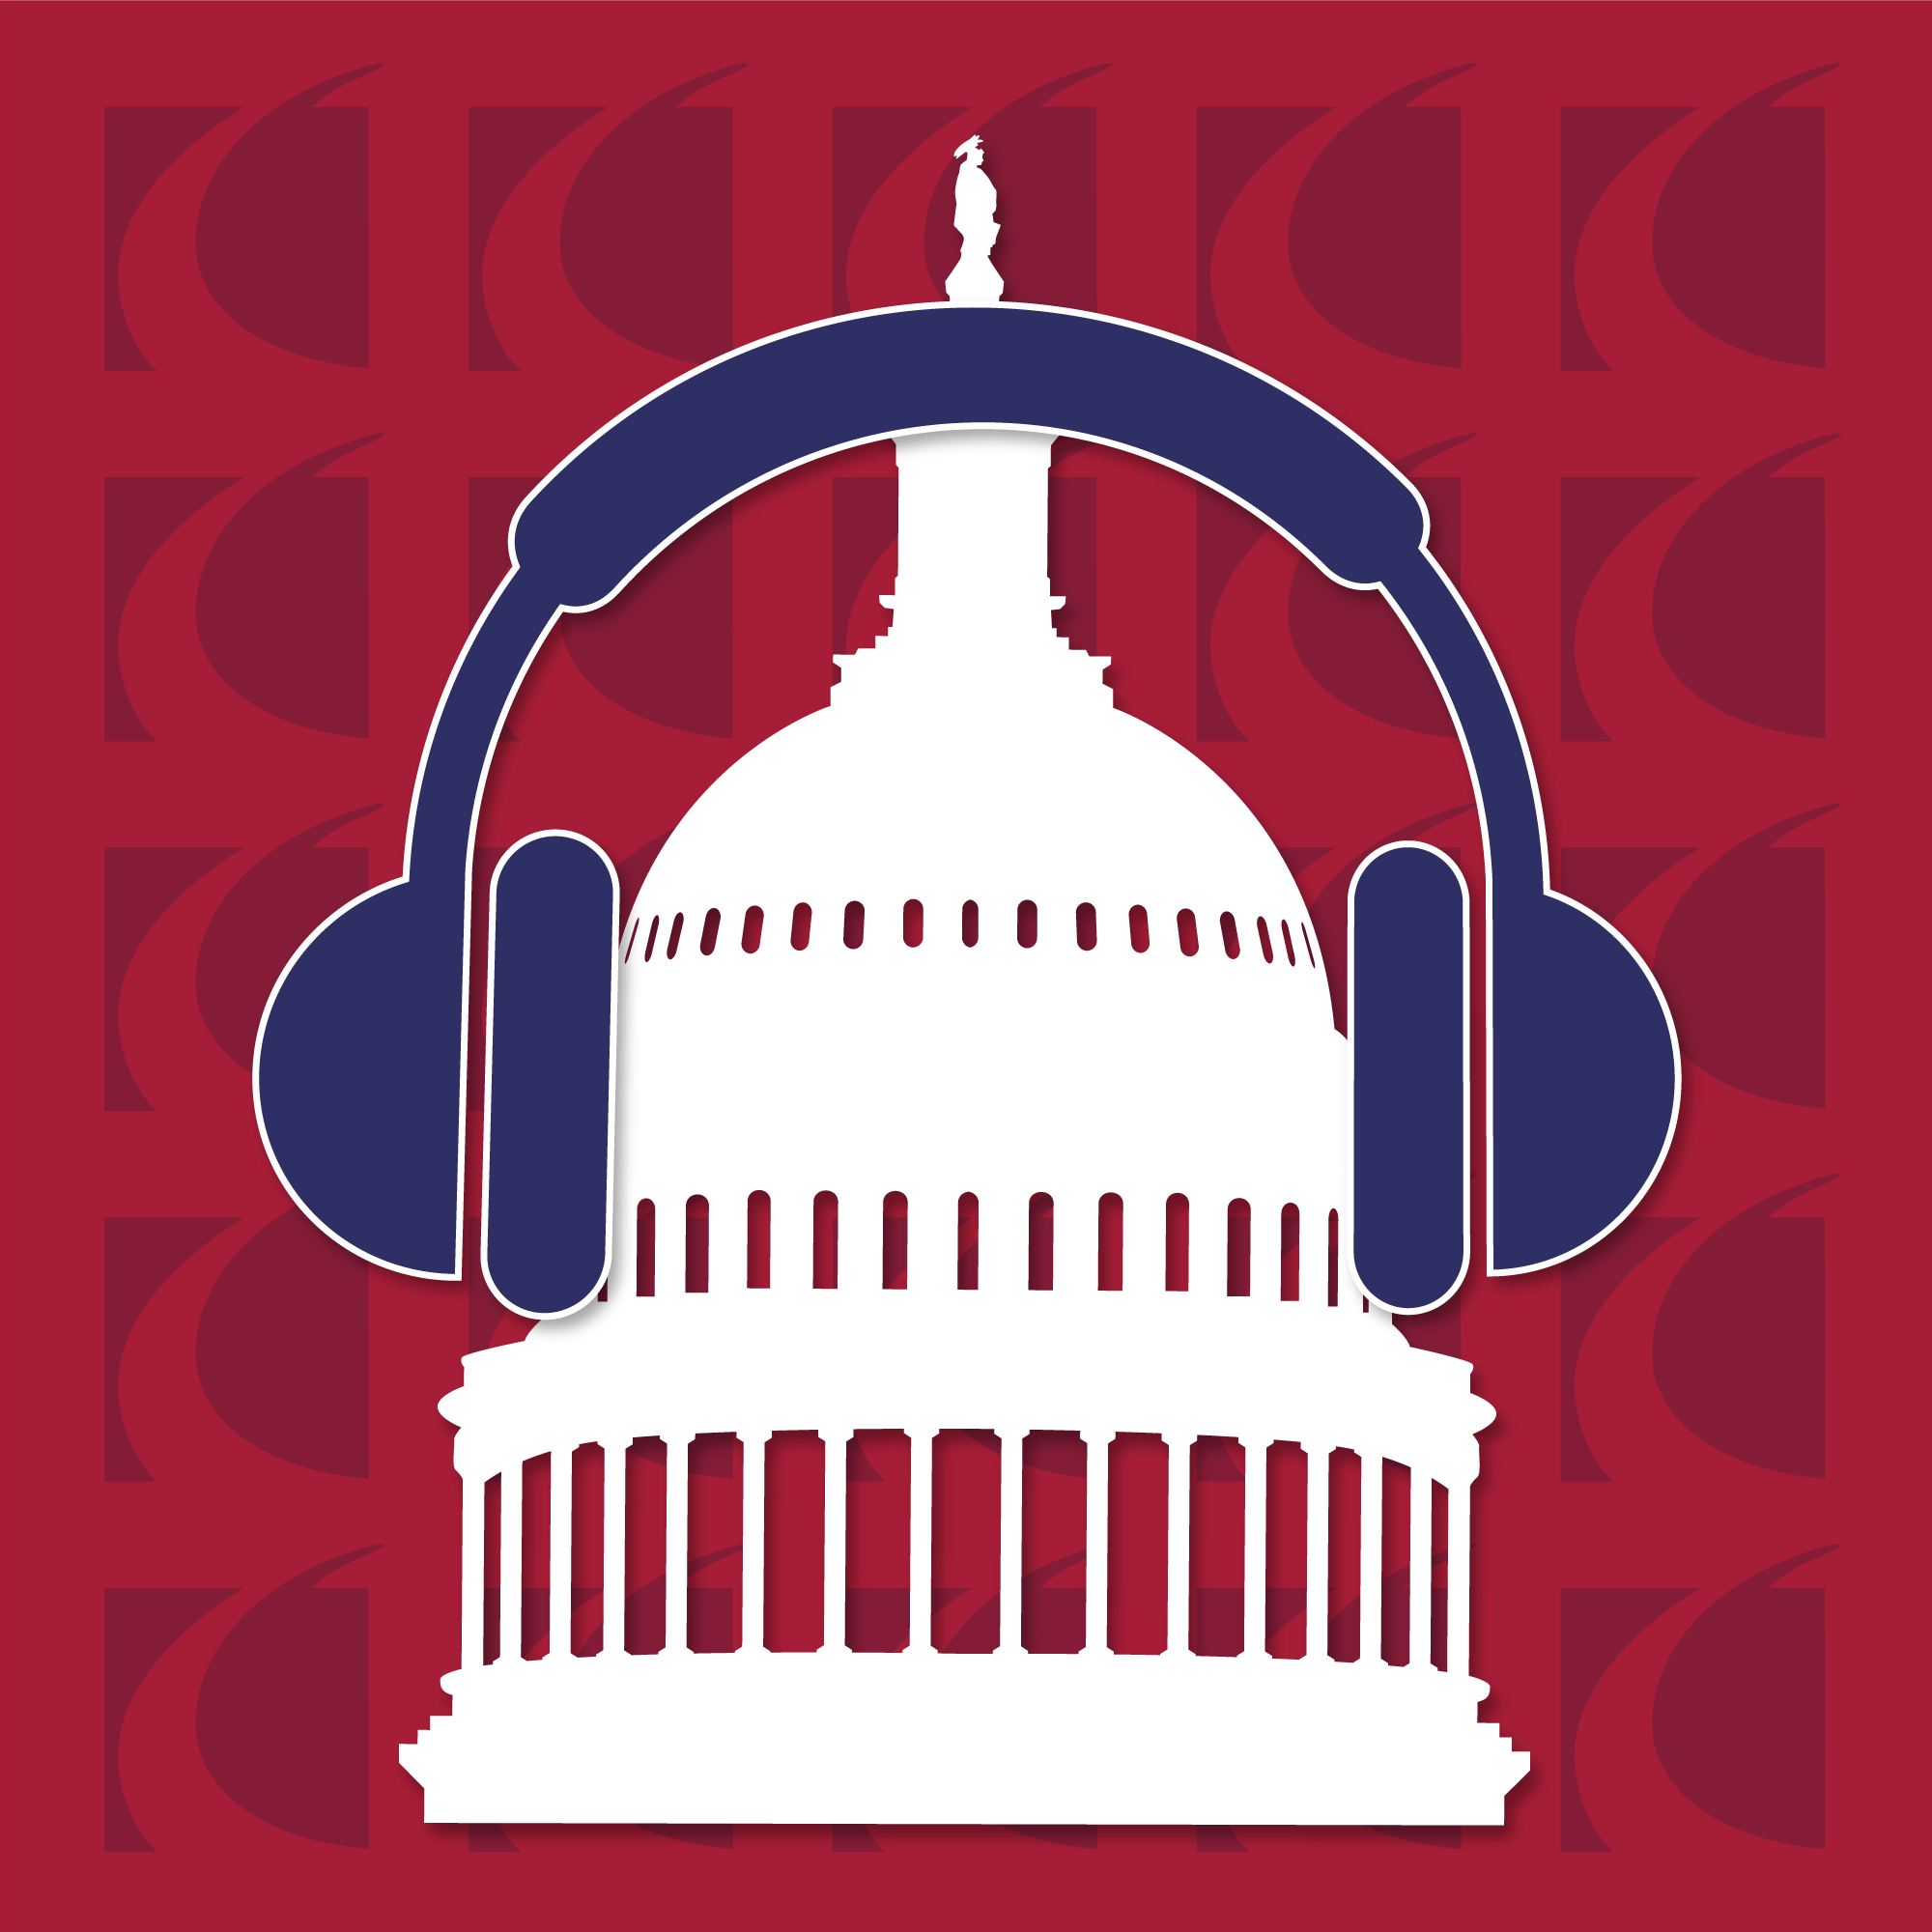 July 15: Fastest 5 Minutes, The Podcast Gov't Contractors Can’t Do Without - Crowell & Moring LLP